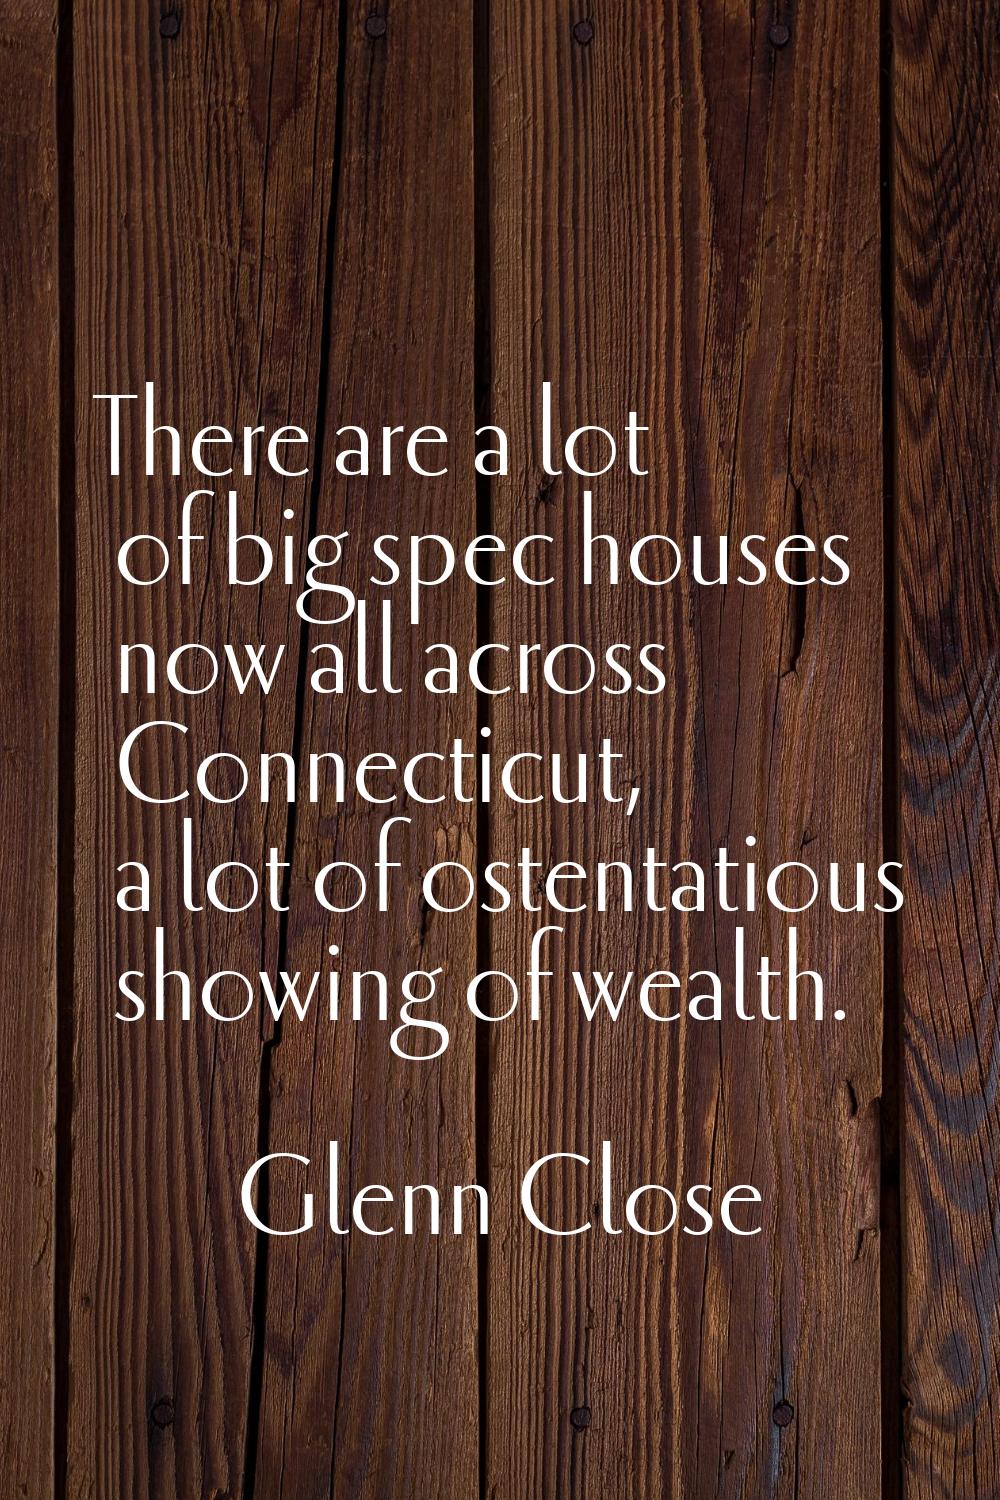 There are a lot of big spec houses now all across Connecticut, a lot of ostentatious showing of wea